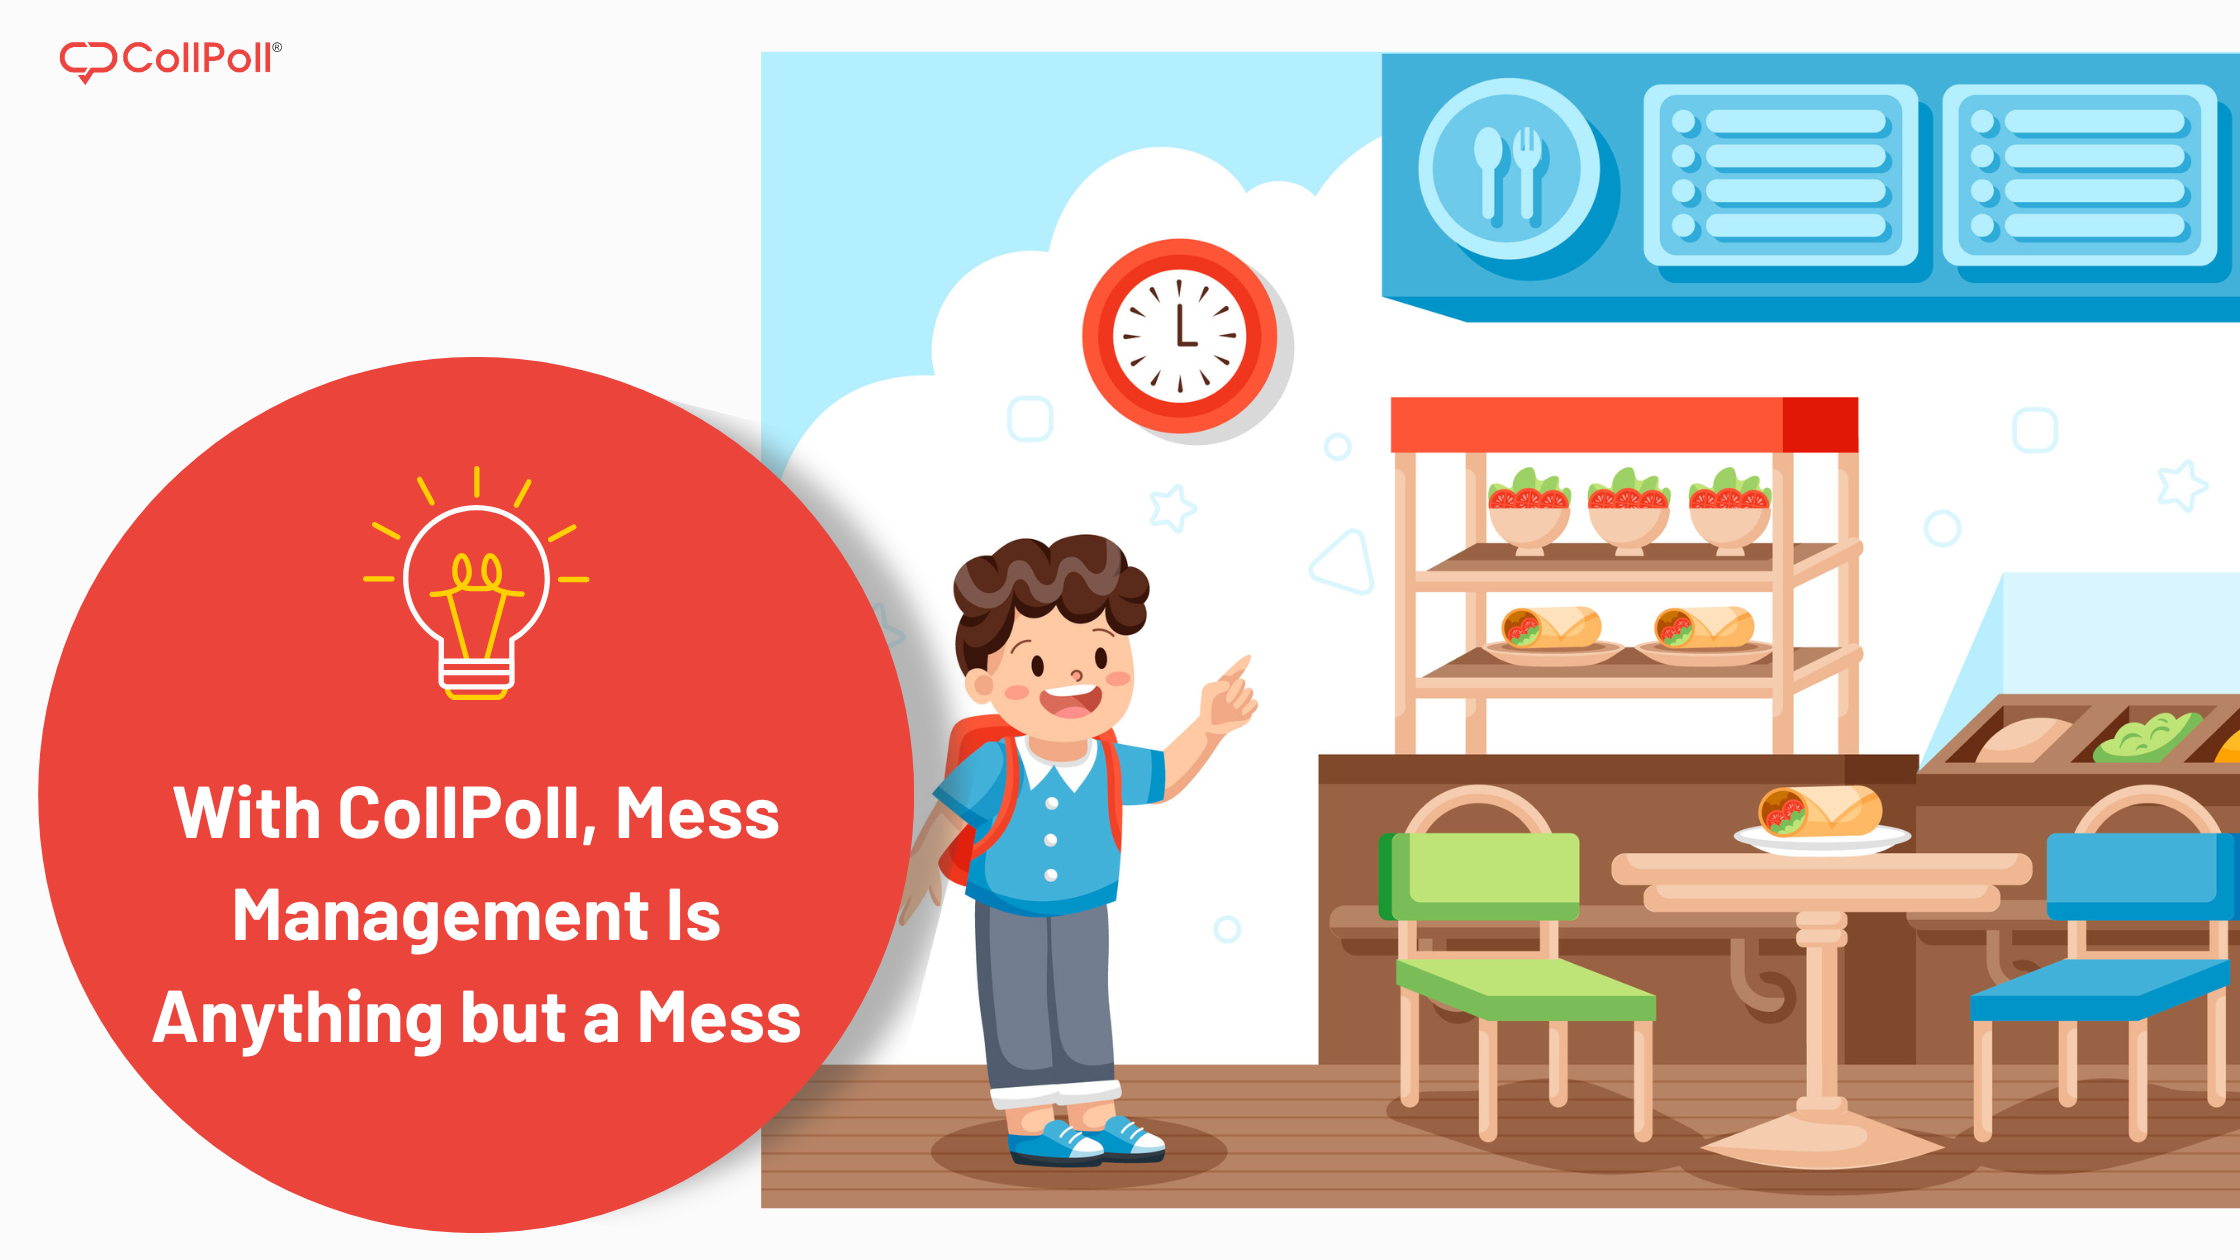 With Collpoll, Mess Management Is Anything but a Mess